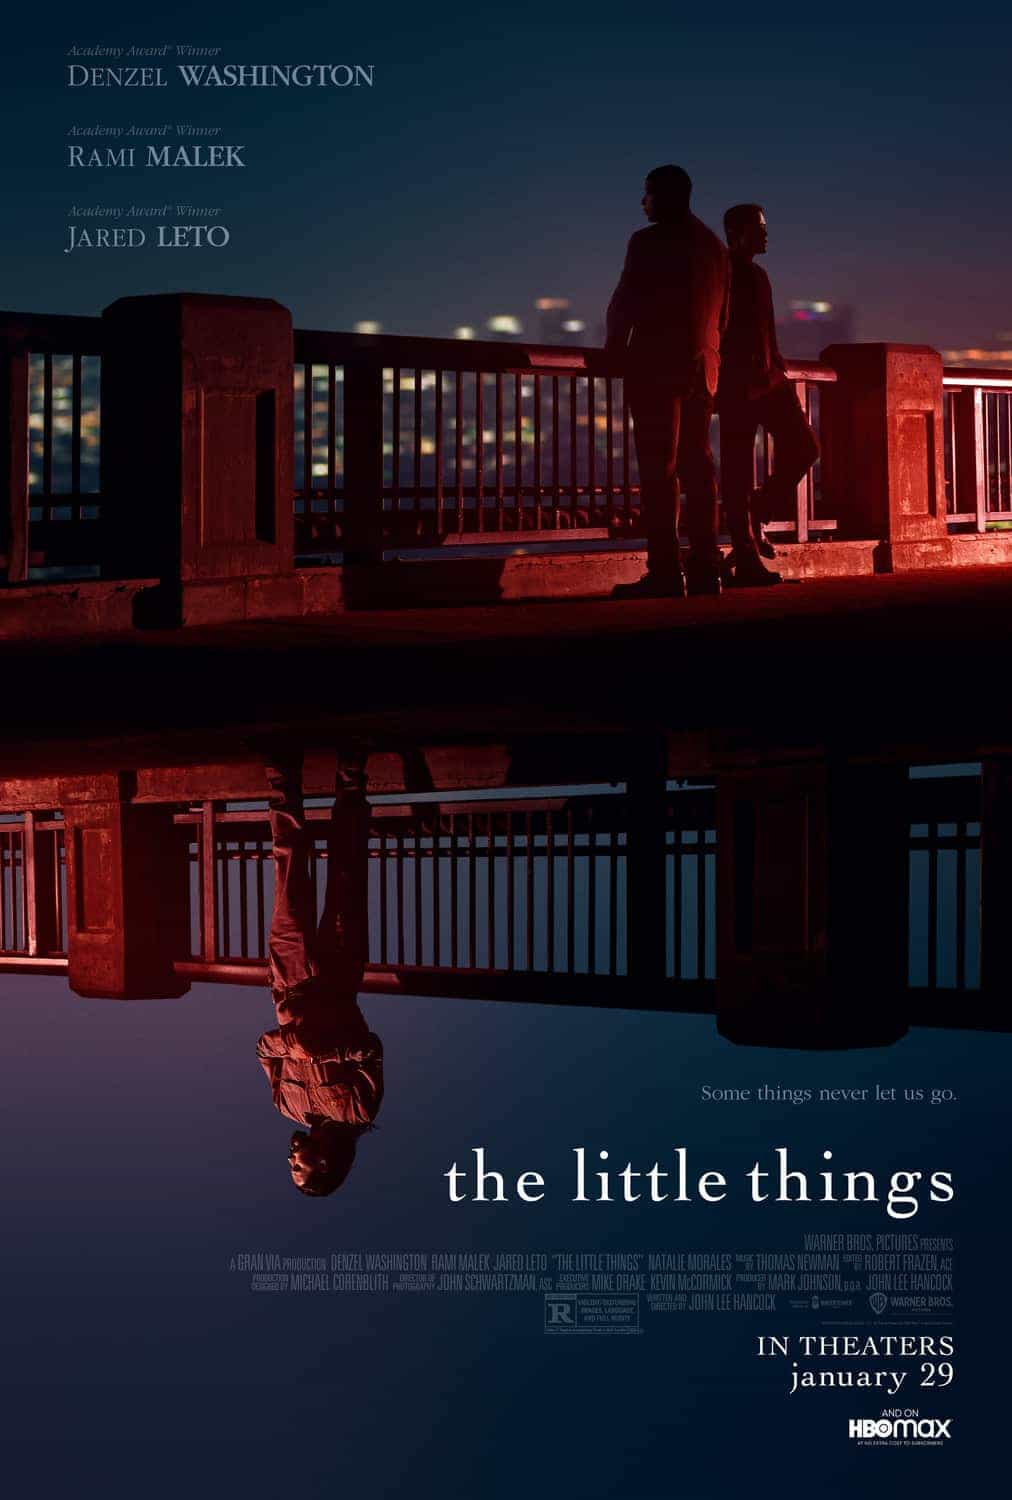 US Box Office Weekend Report 29th - 31st January 2021:  The Little Things lands on top of the US box office with a strong $4.8 Million debut